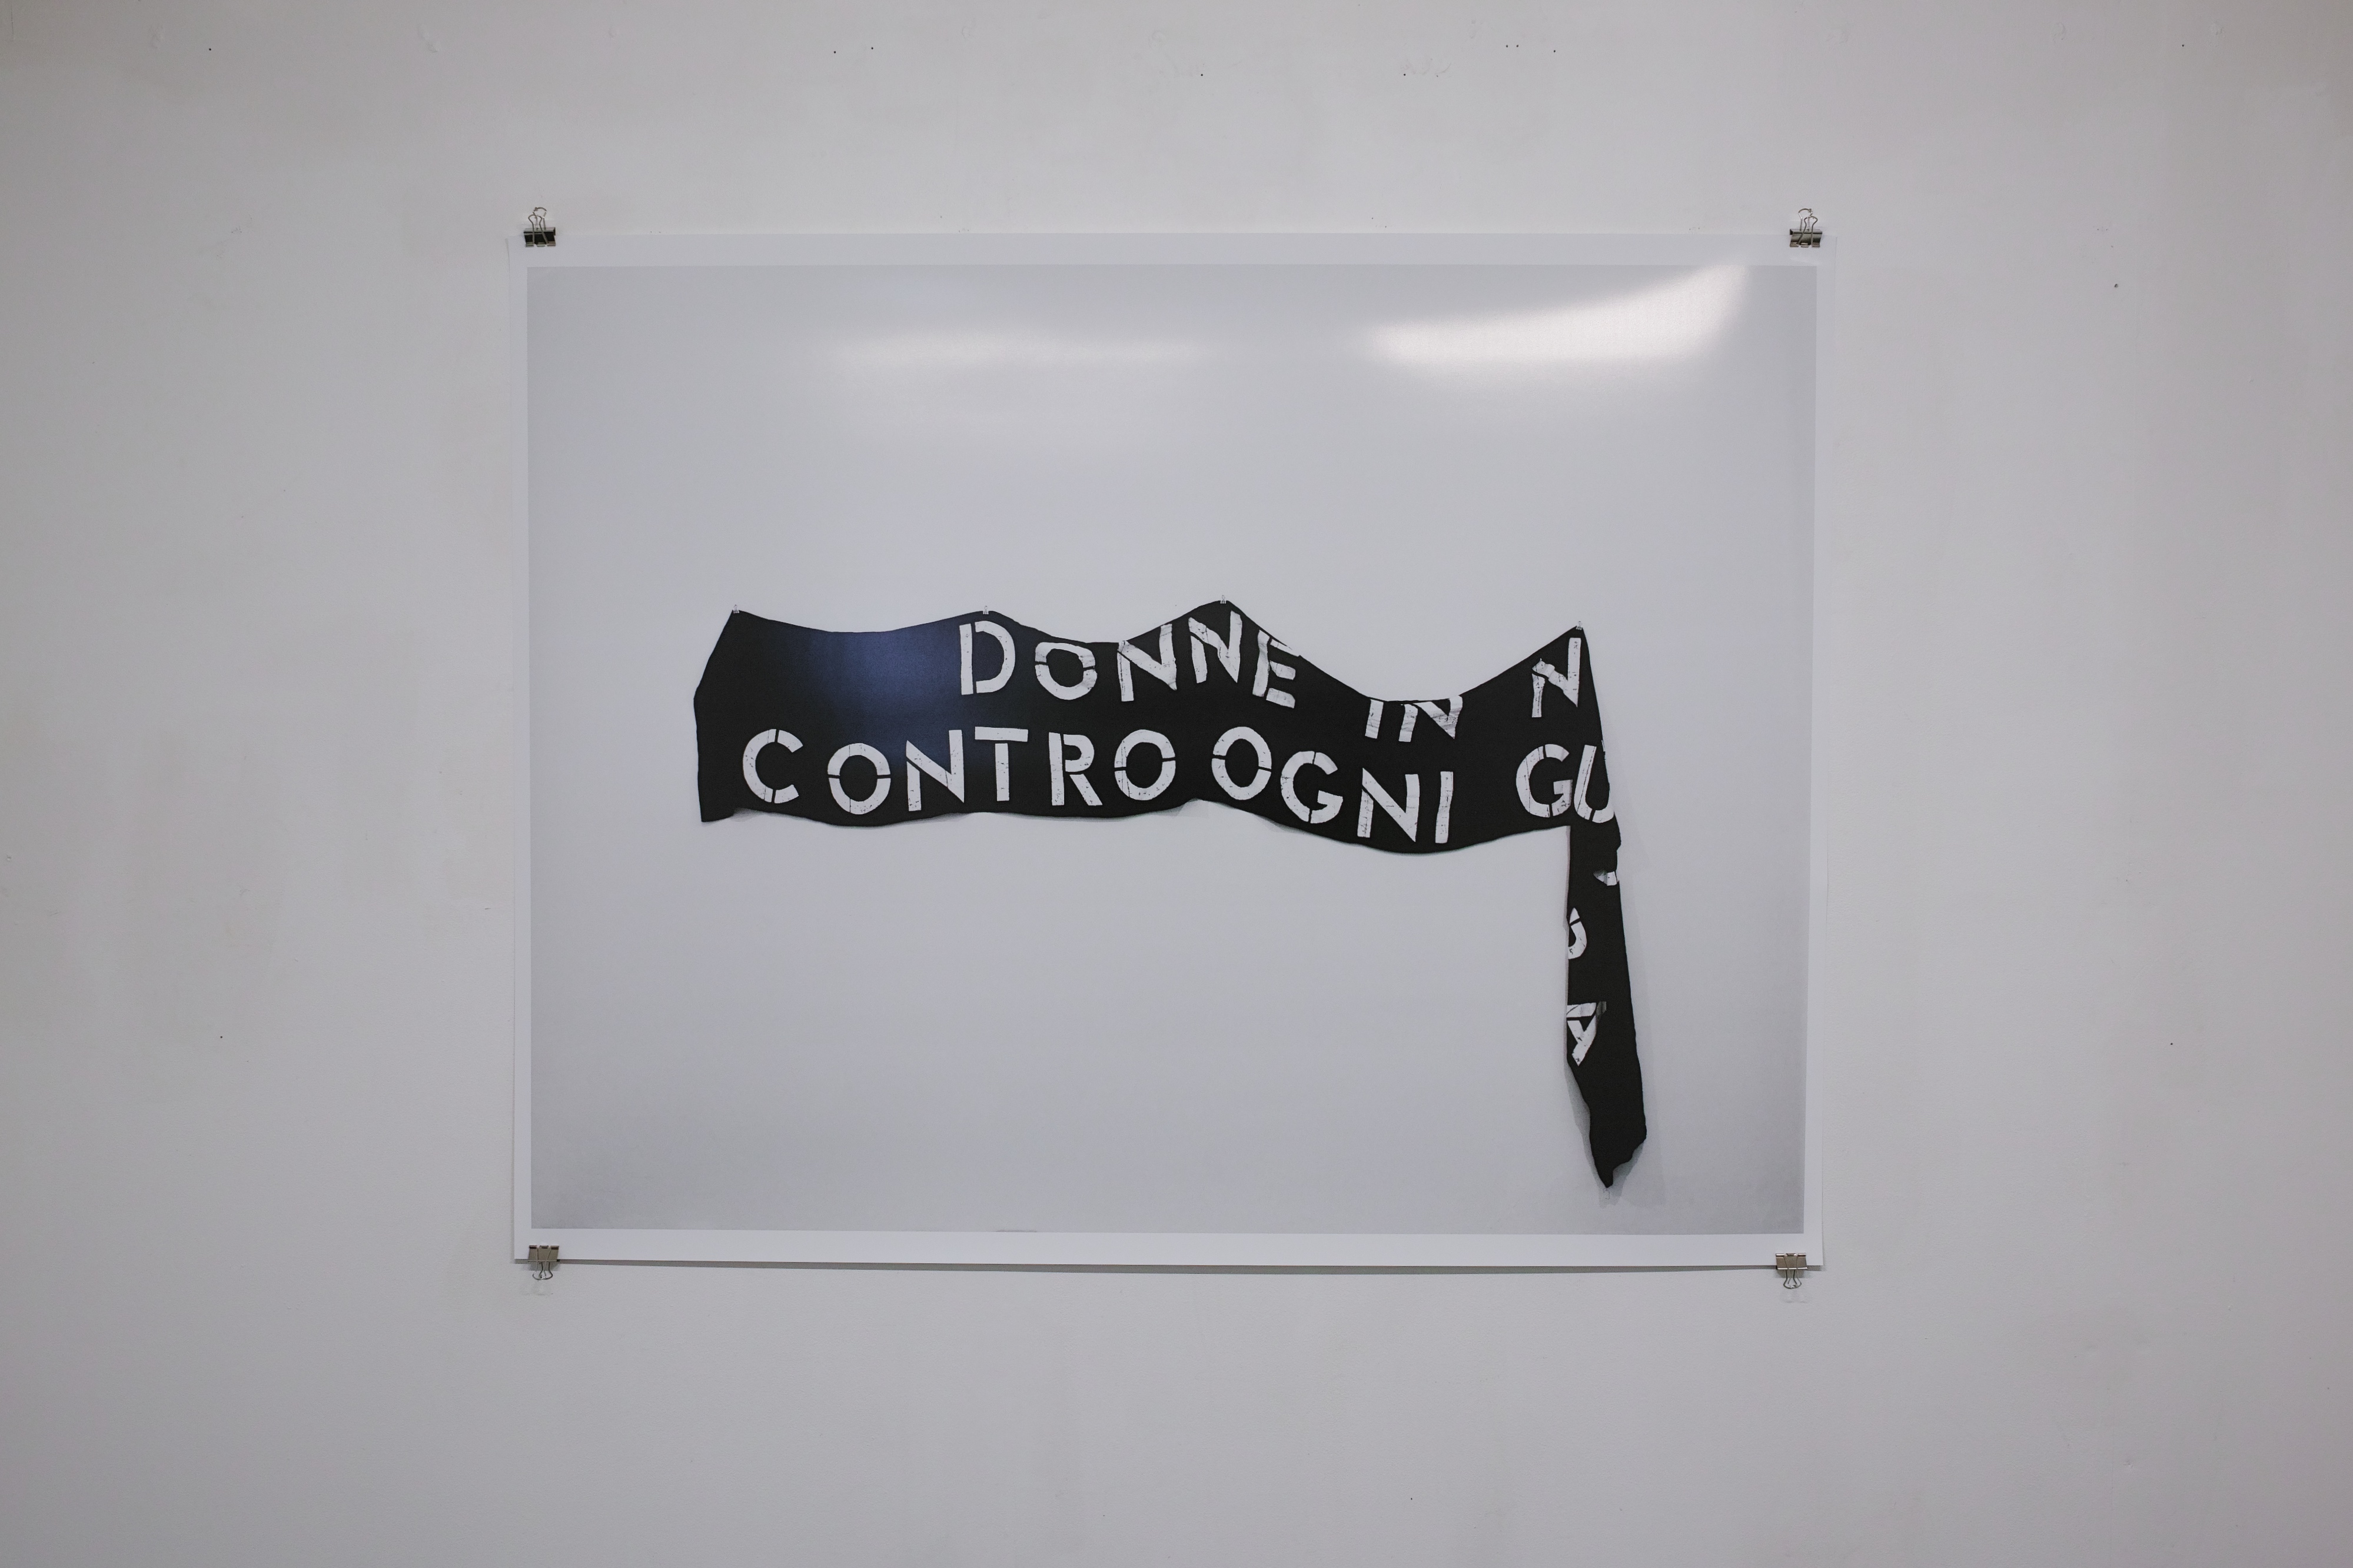 Donne in nero contro ogni guerra (women in black against all wars), 1980 banner photographed by Simona Barbera in 2016